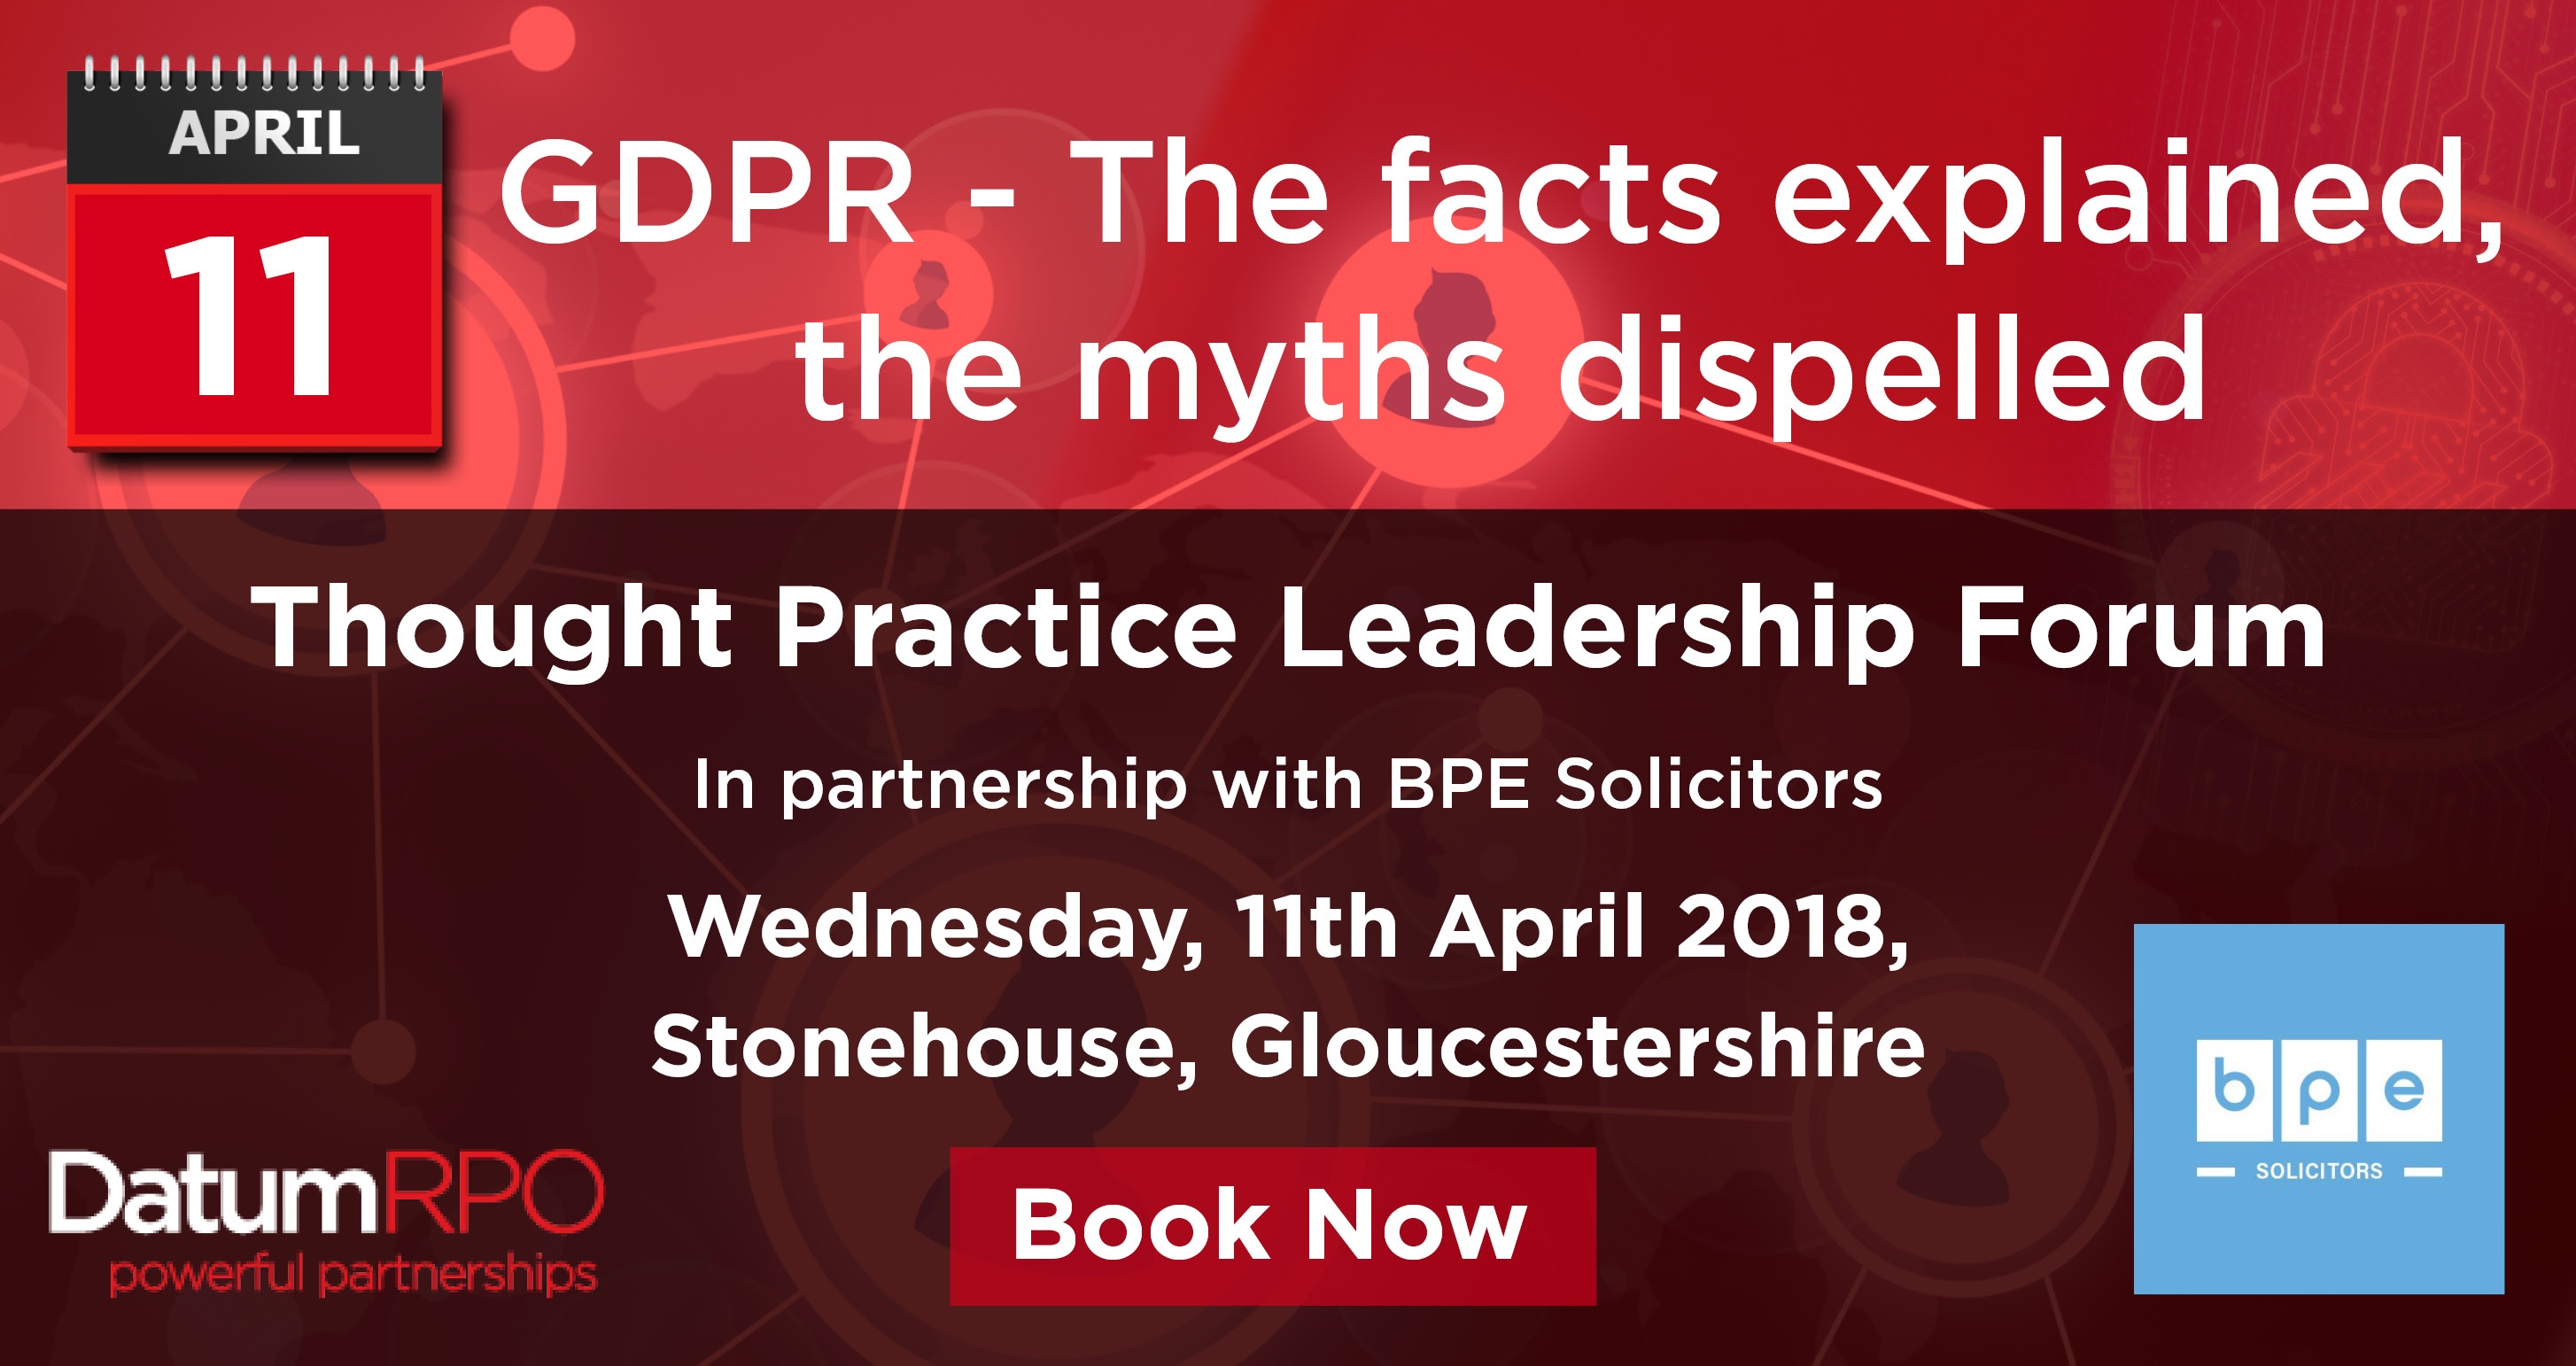 Join us on Wedneday, 11th April at our GDPR Thought Leadership Forum Event